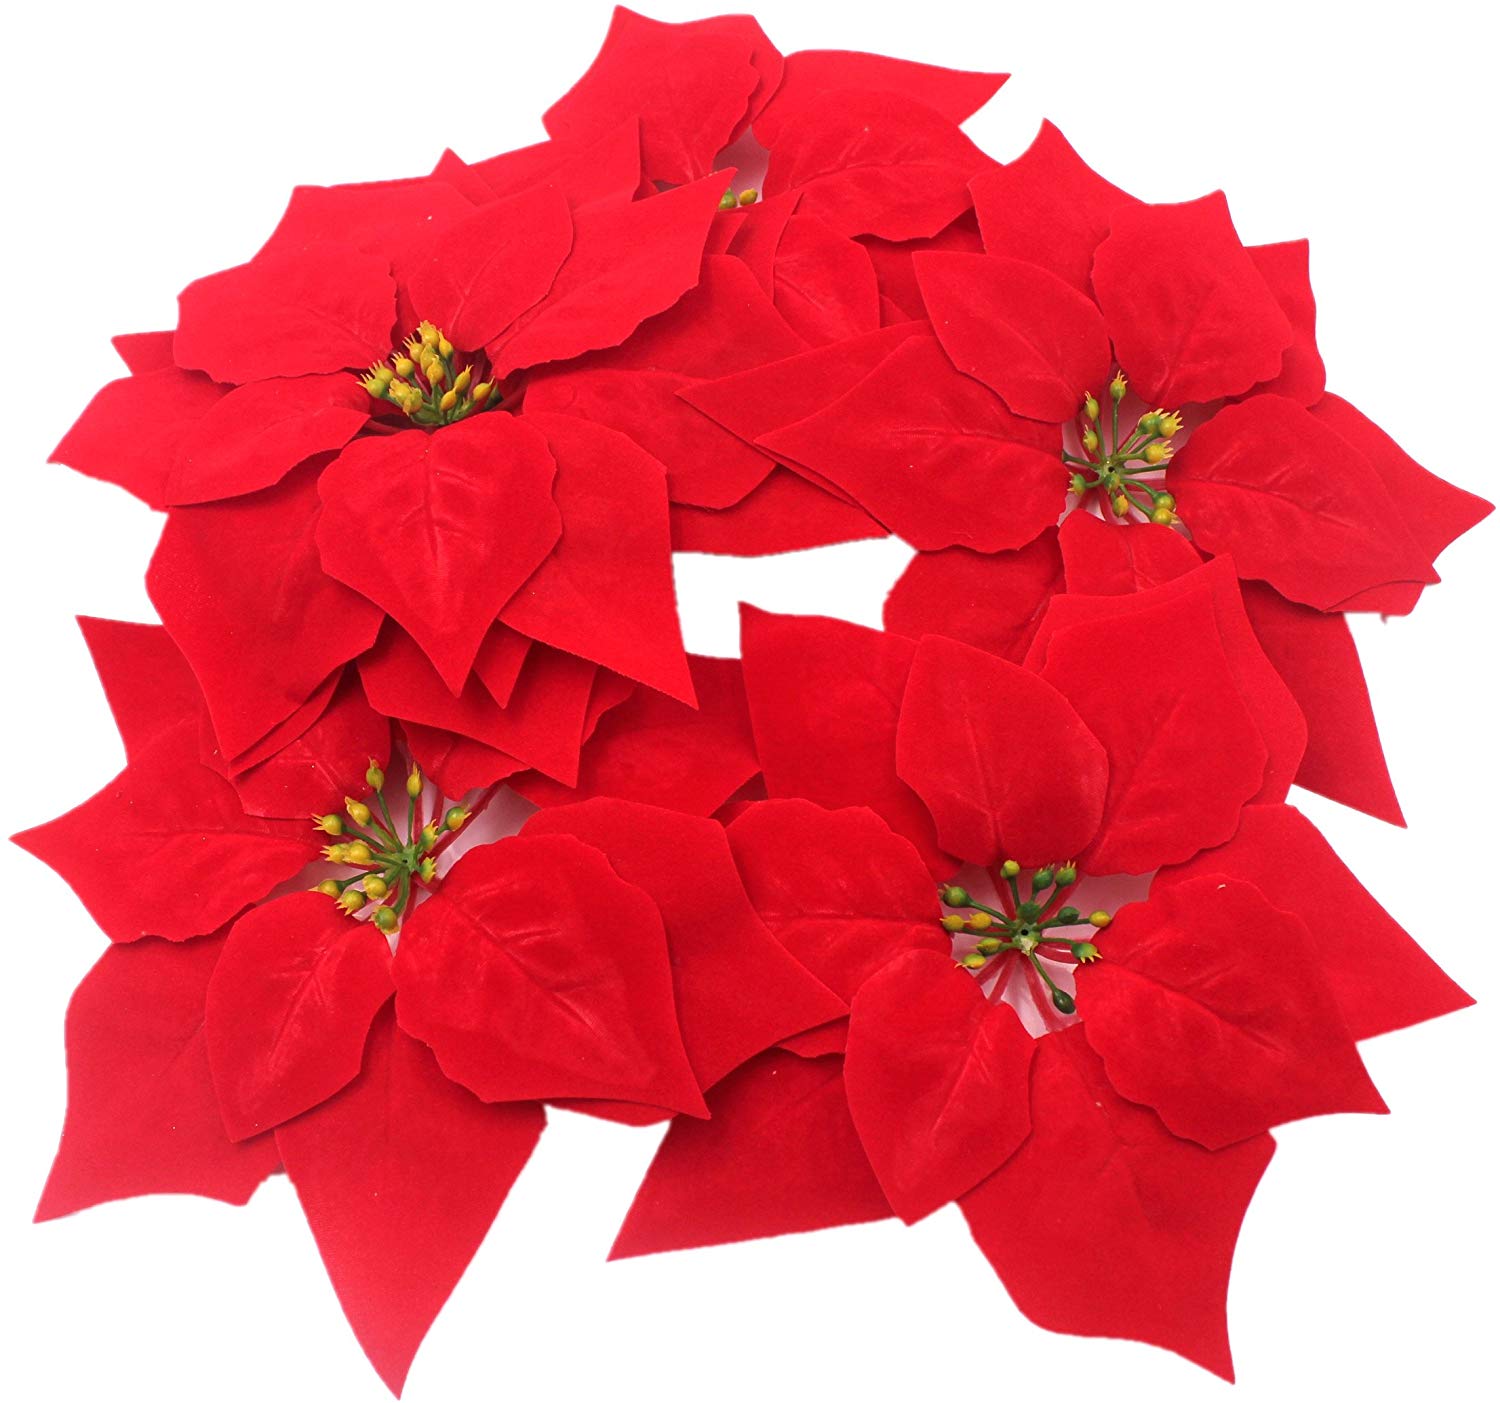 Artificial Christmas Flowers Red Poinsettia Christmas Tree Ornaments